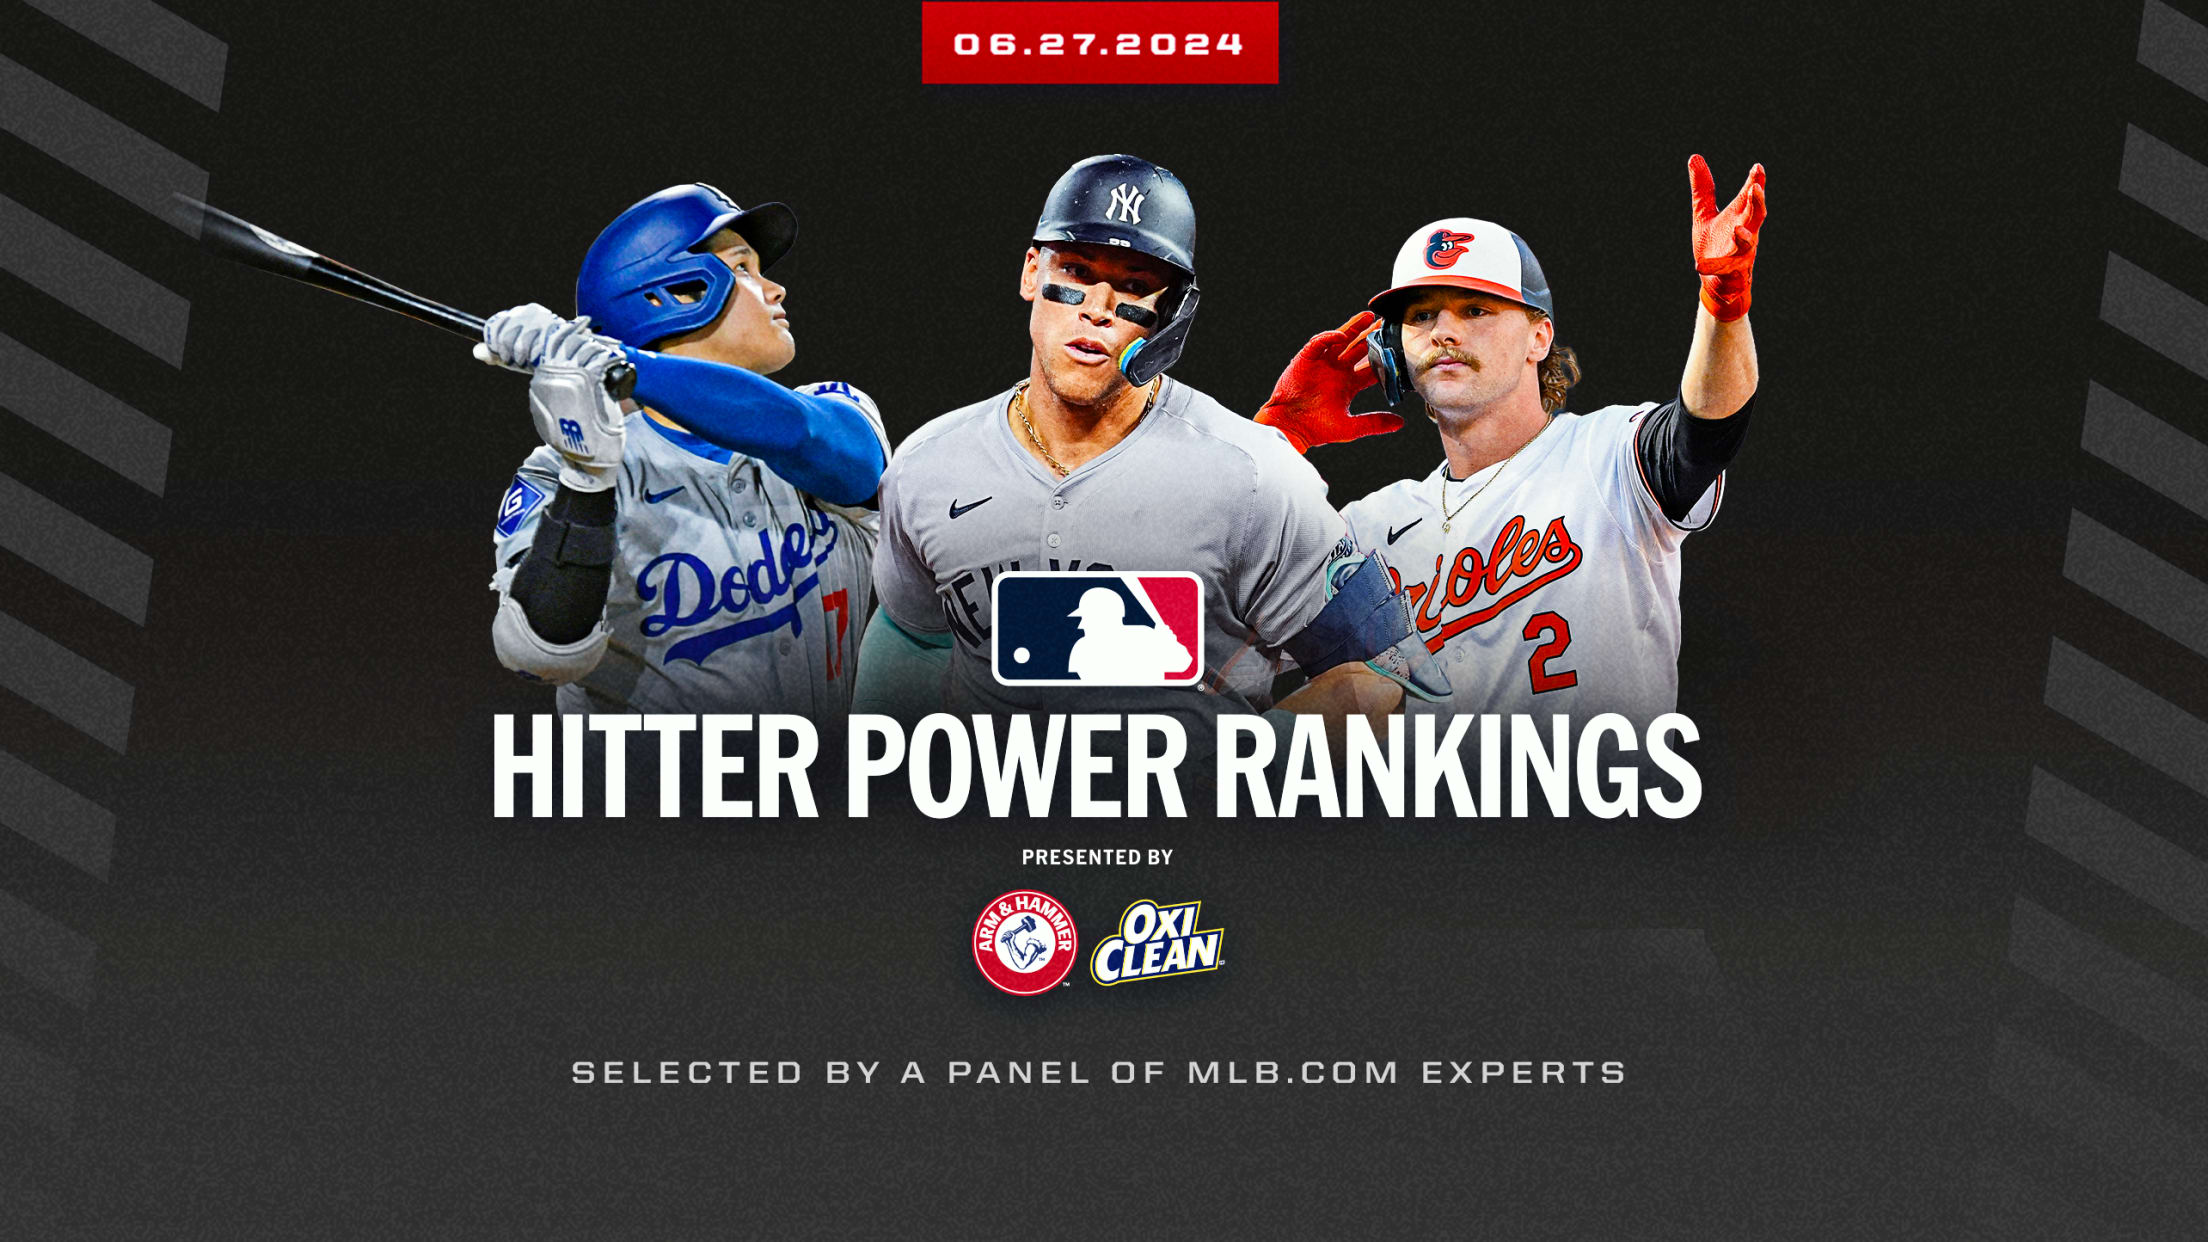 Shohei Ohtani, Aaron Judge and Gunnar Henderson in the Hitter Power Rankings